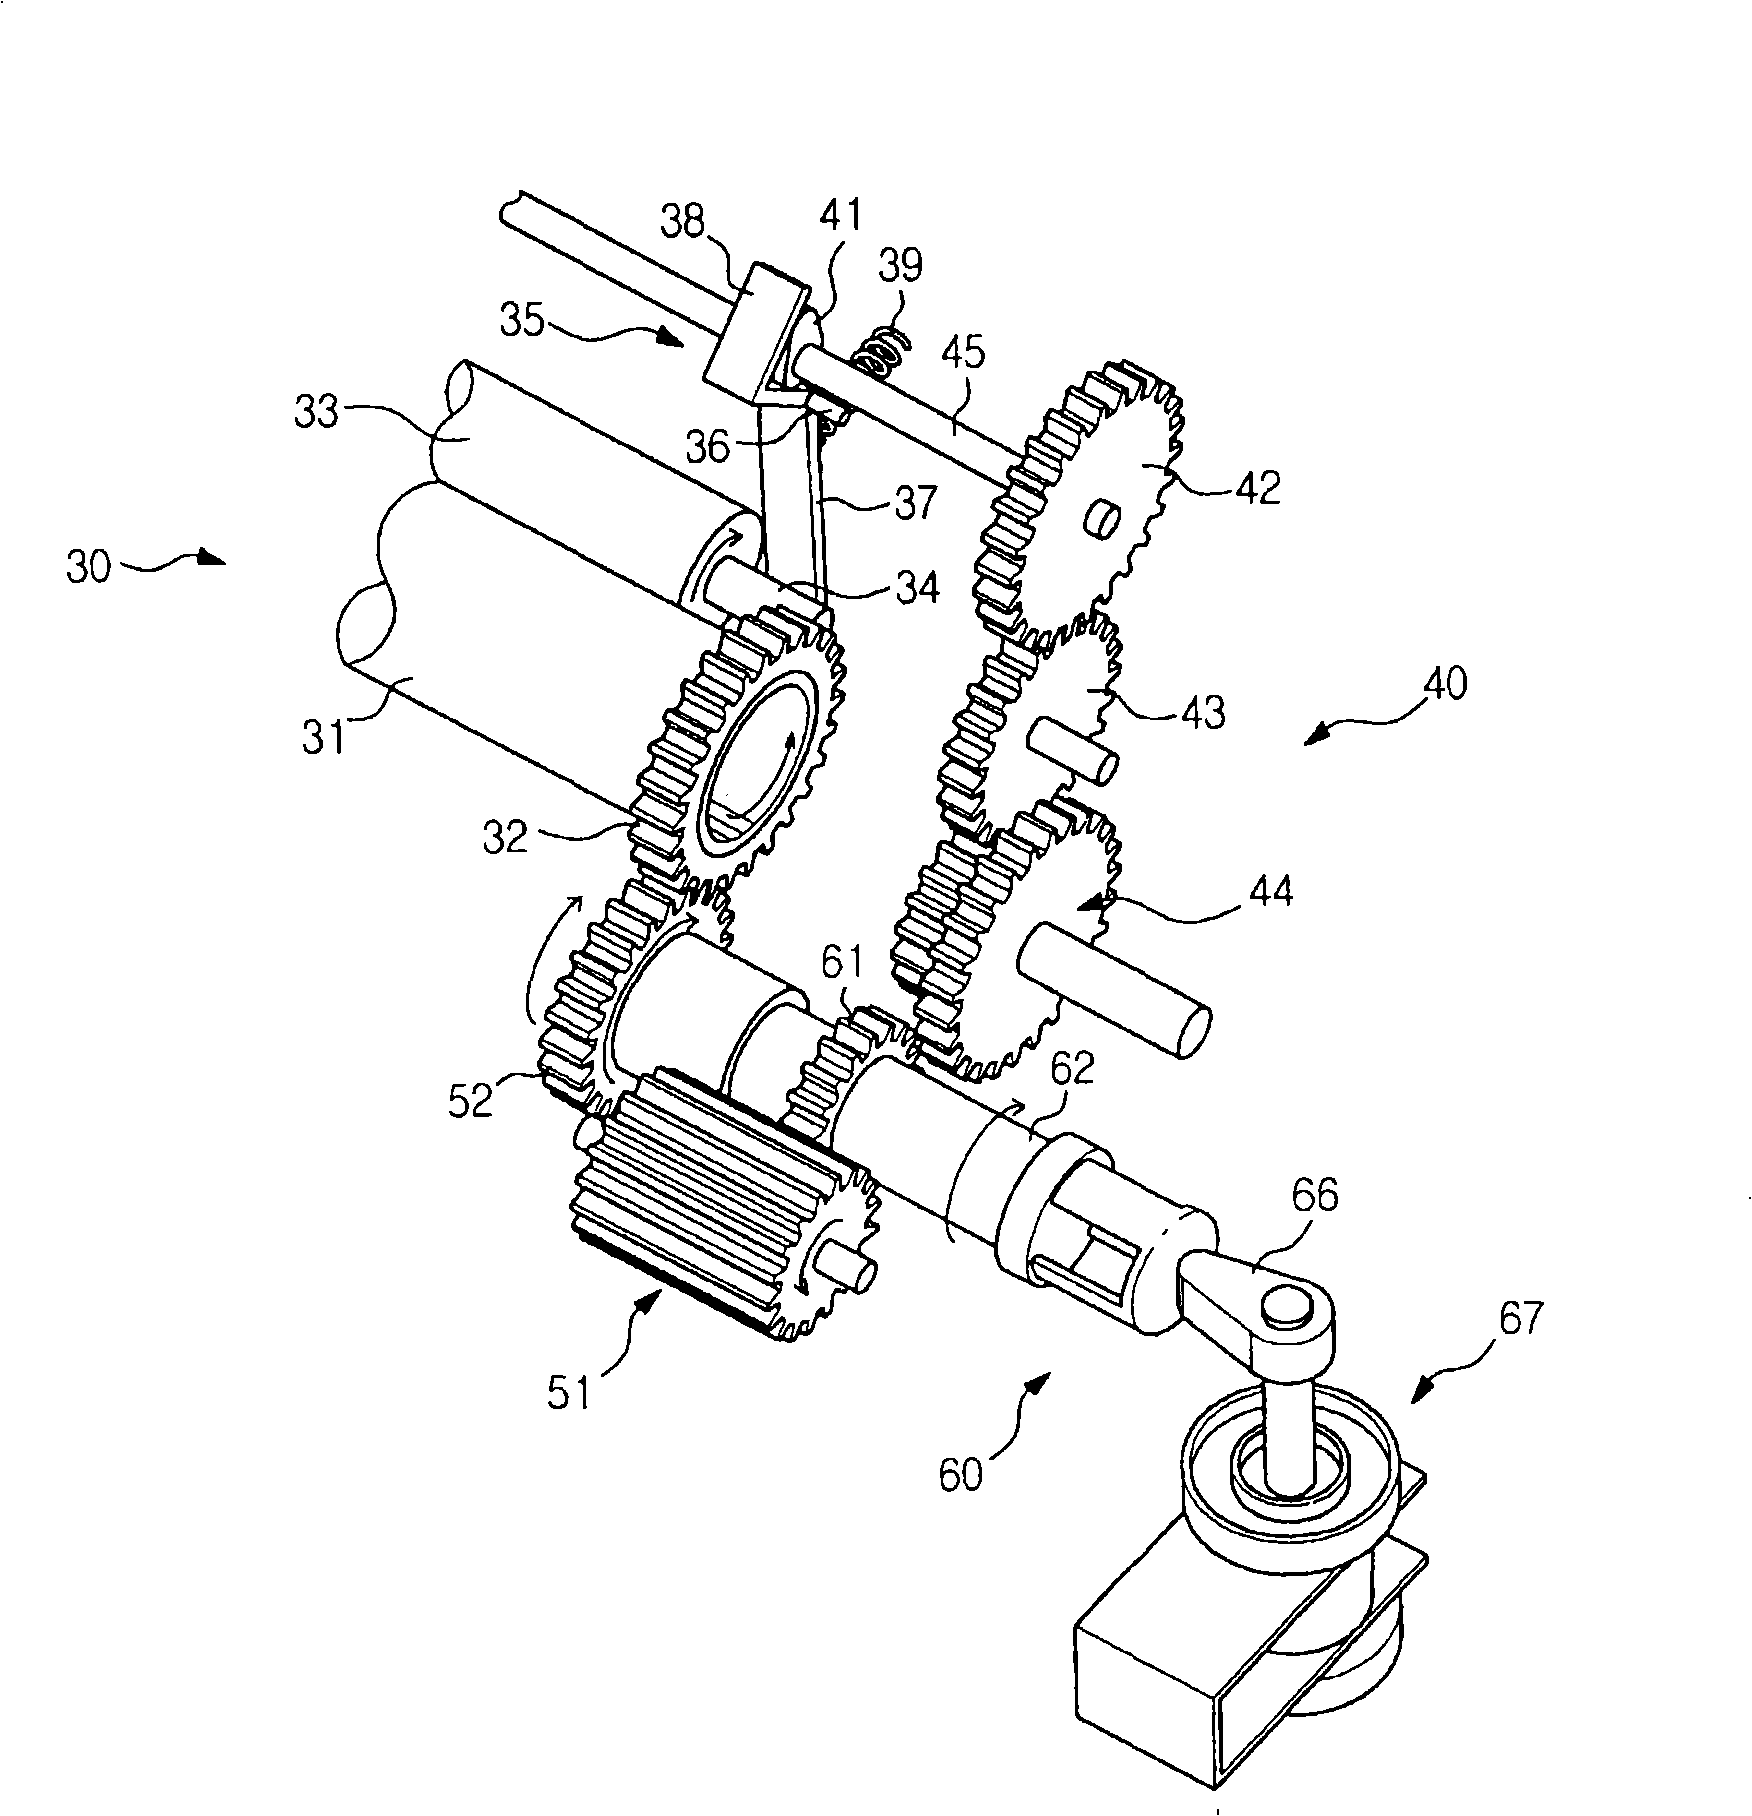 Image forming apparatus and fusing unit thereof